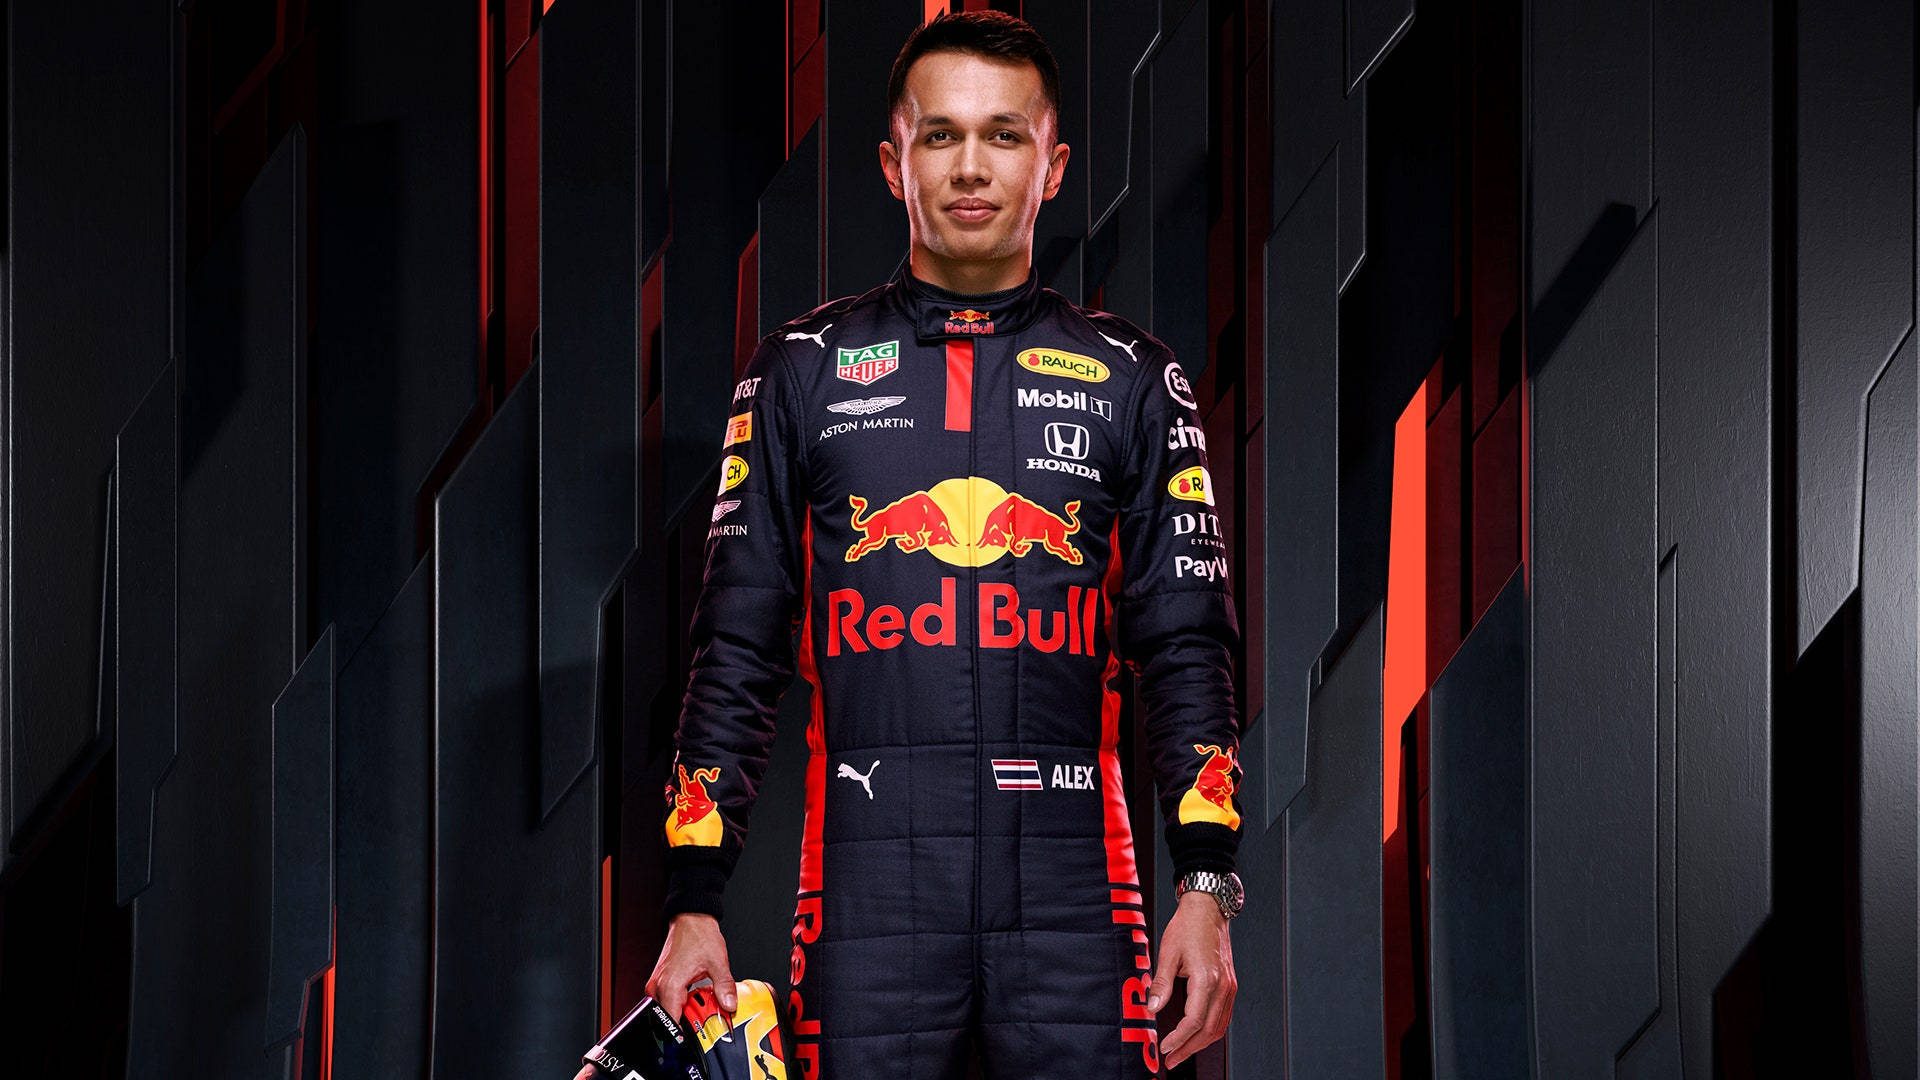 Alexander Albon in his Red Bull Racing Outfit Wallpaper